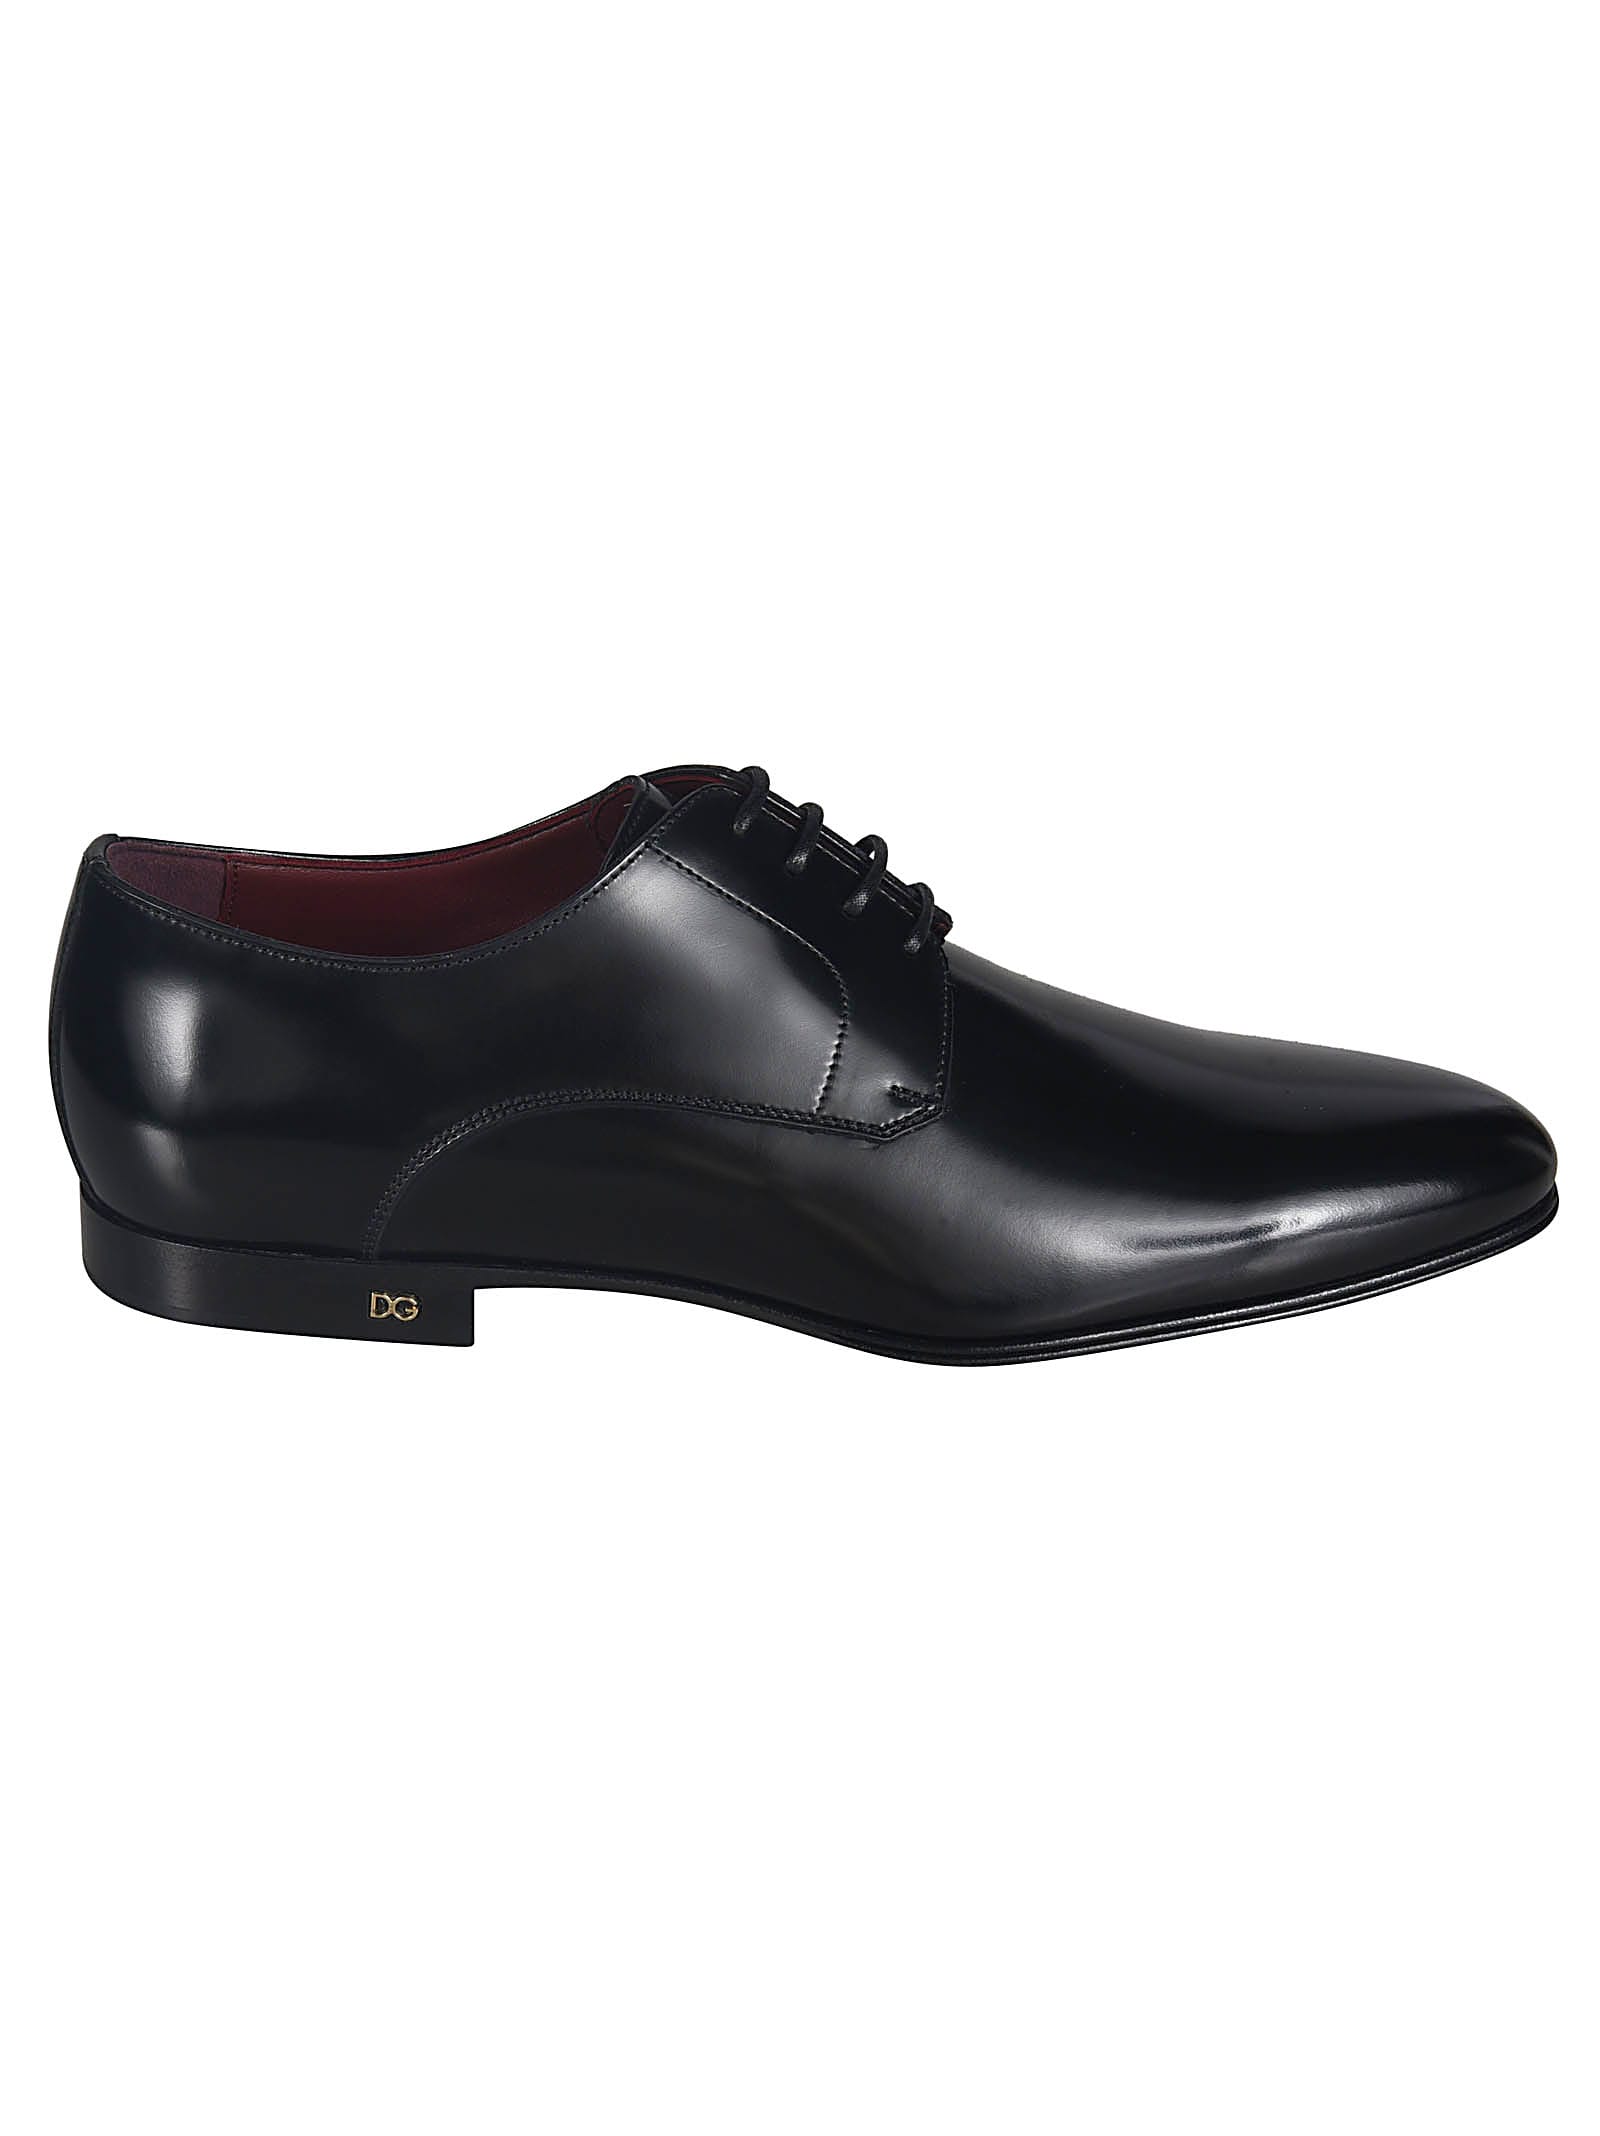 Dolce & Gabbana Logo Detail Plaque Oxford Shoes In Black